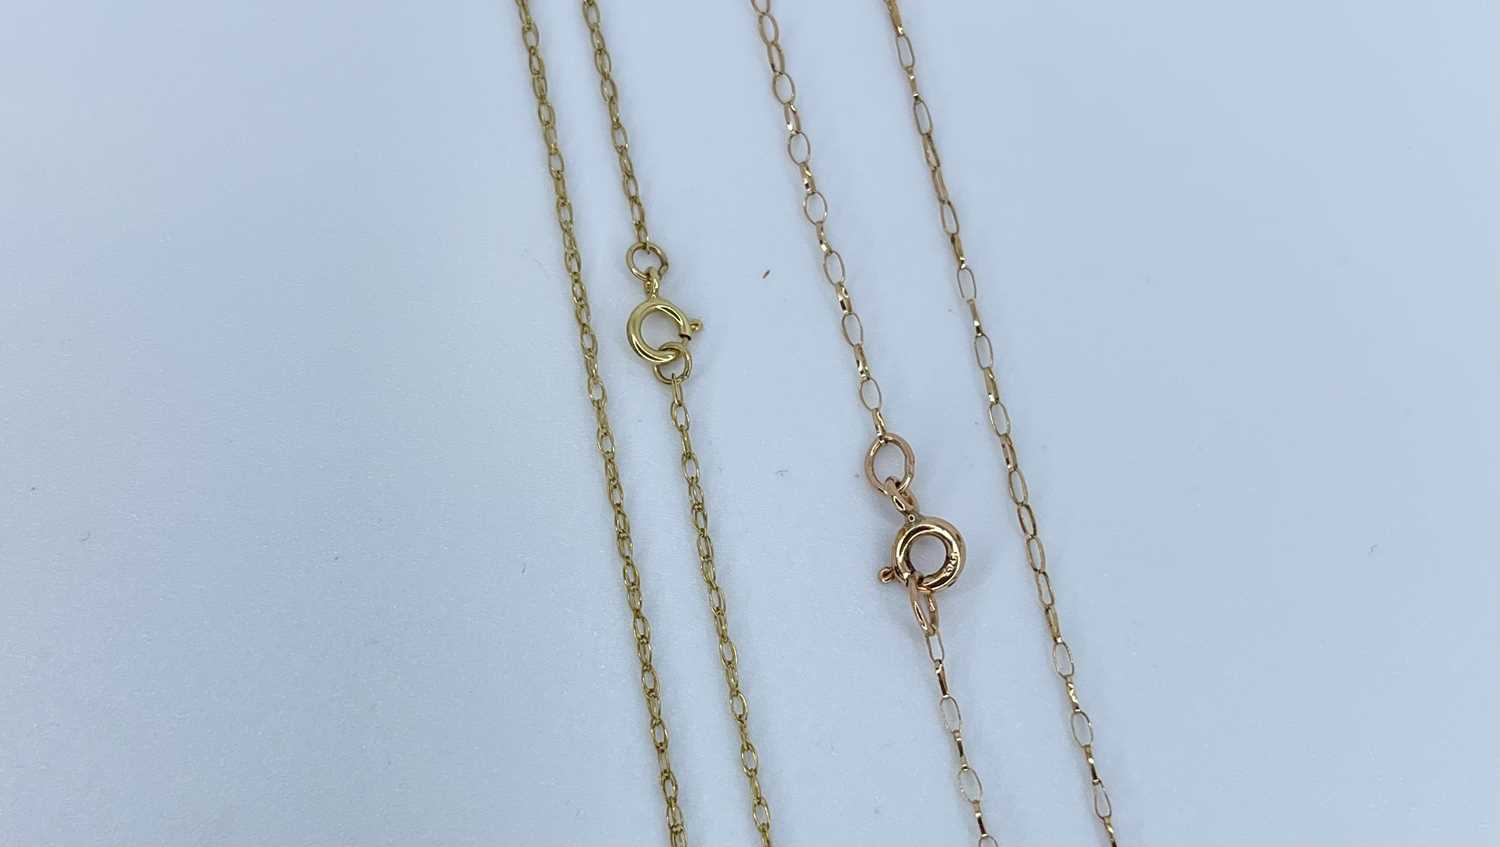 2x 9ct Gold Necklaces ( 5.5 grams ) - Image 2 of 4